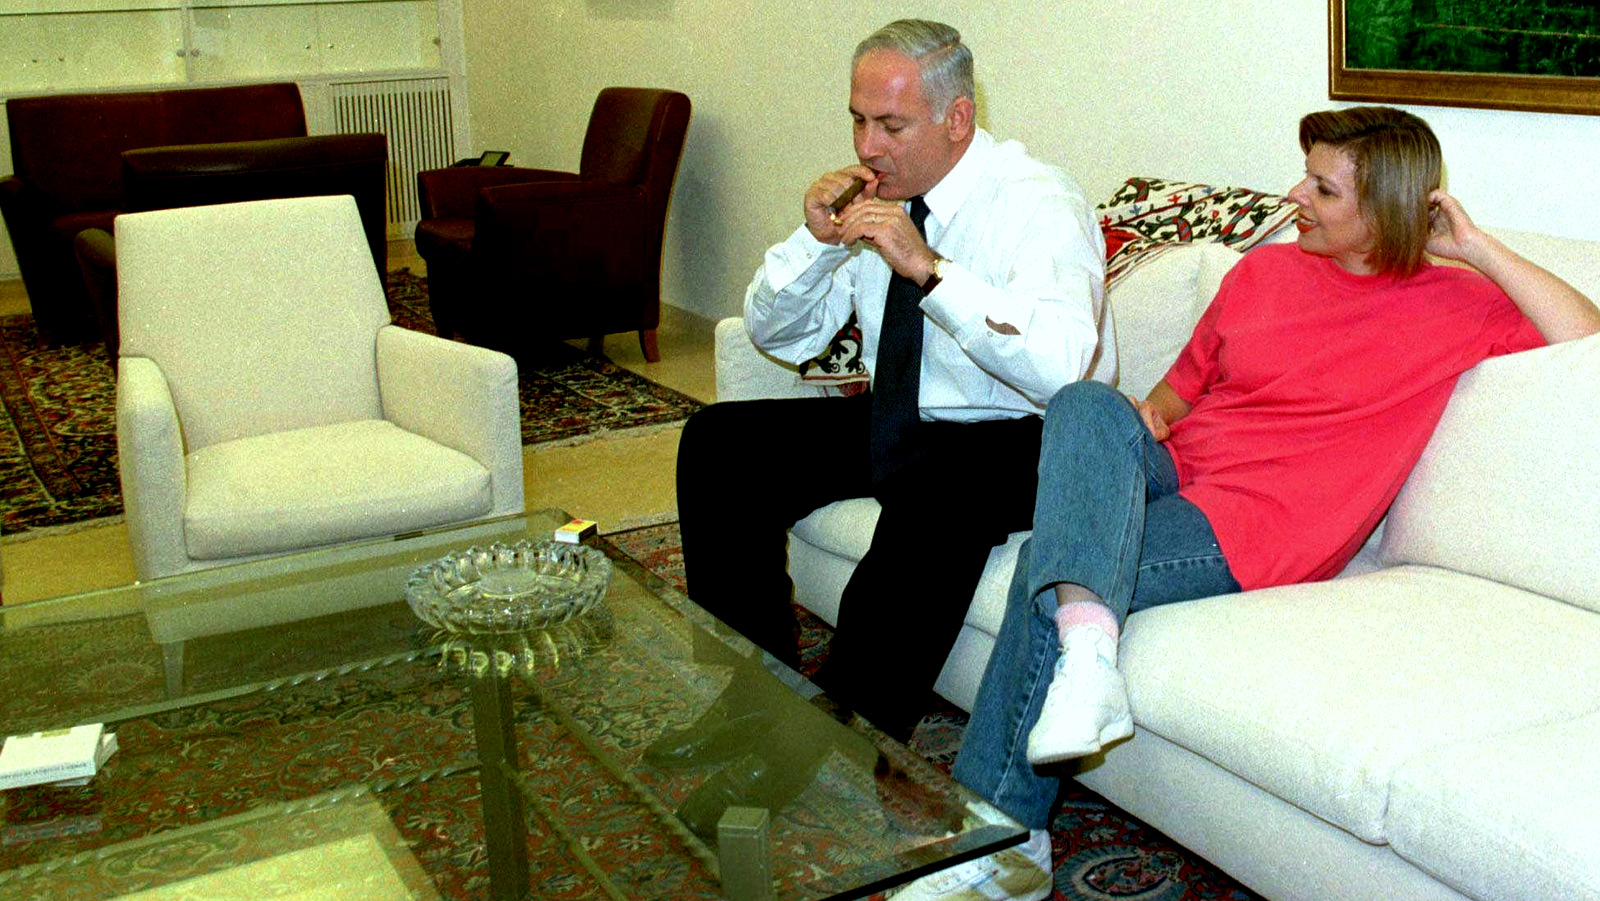 Sarah Netanyahu watches her husband, Israeli Prime Minister Benjamin Netanyahu, light a cigar in the living room of their newly refurbished official residence in Jerusalem Sunday Sept 28 1997. (AP/Zoom 77)